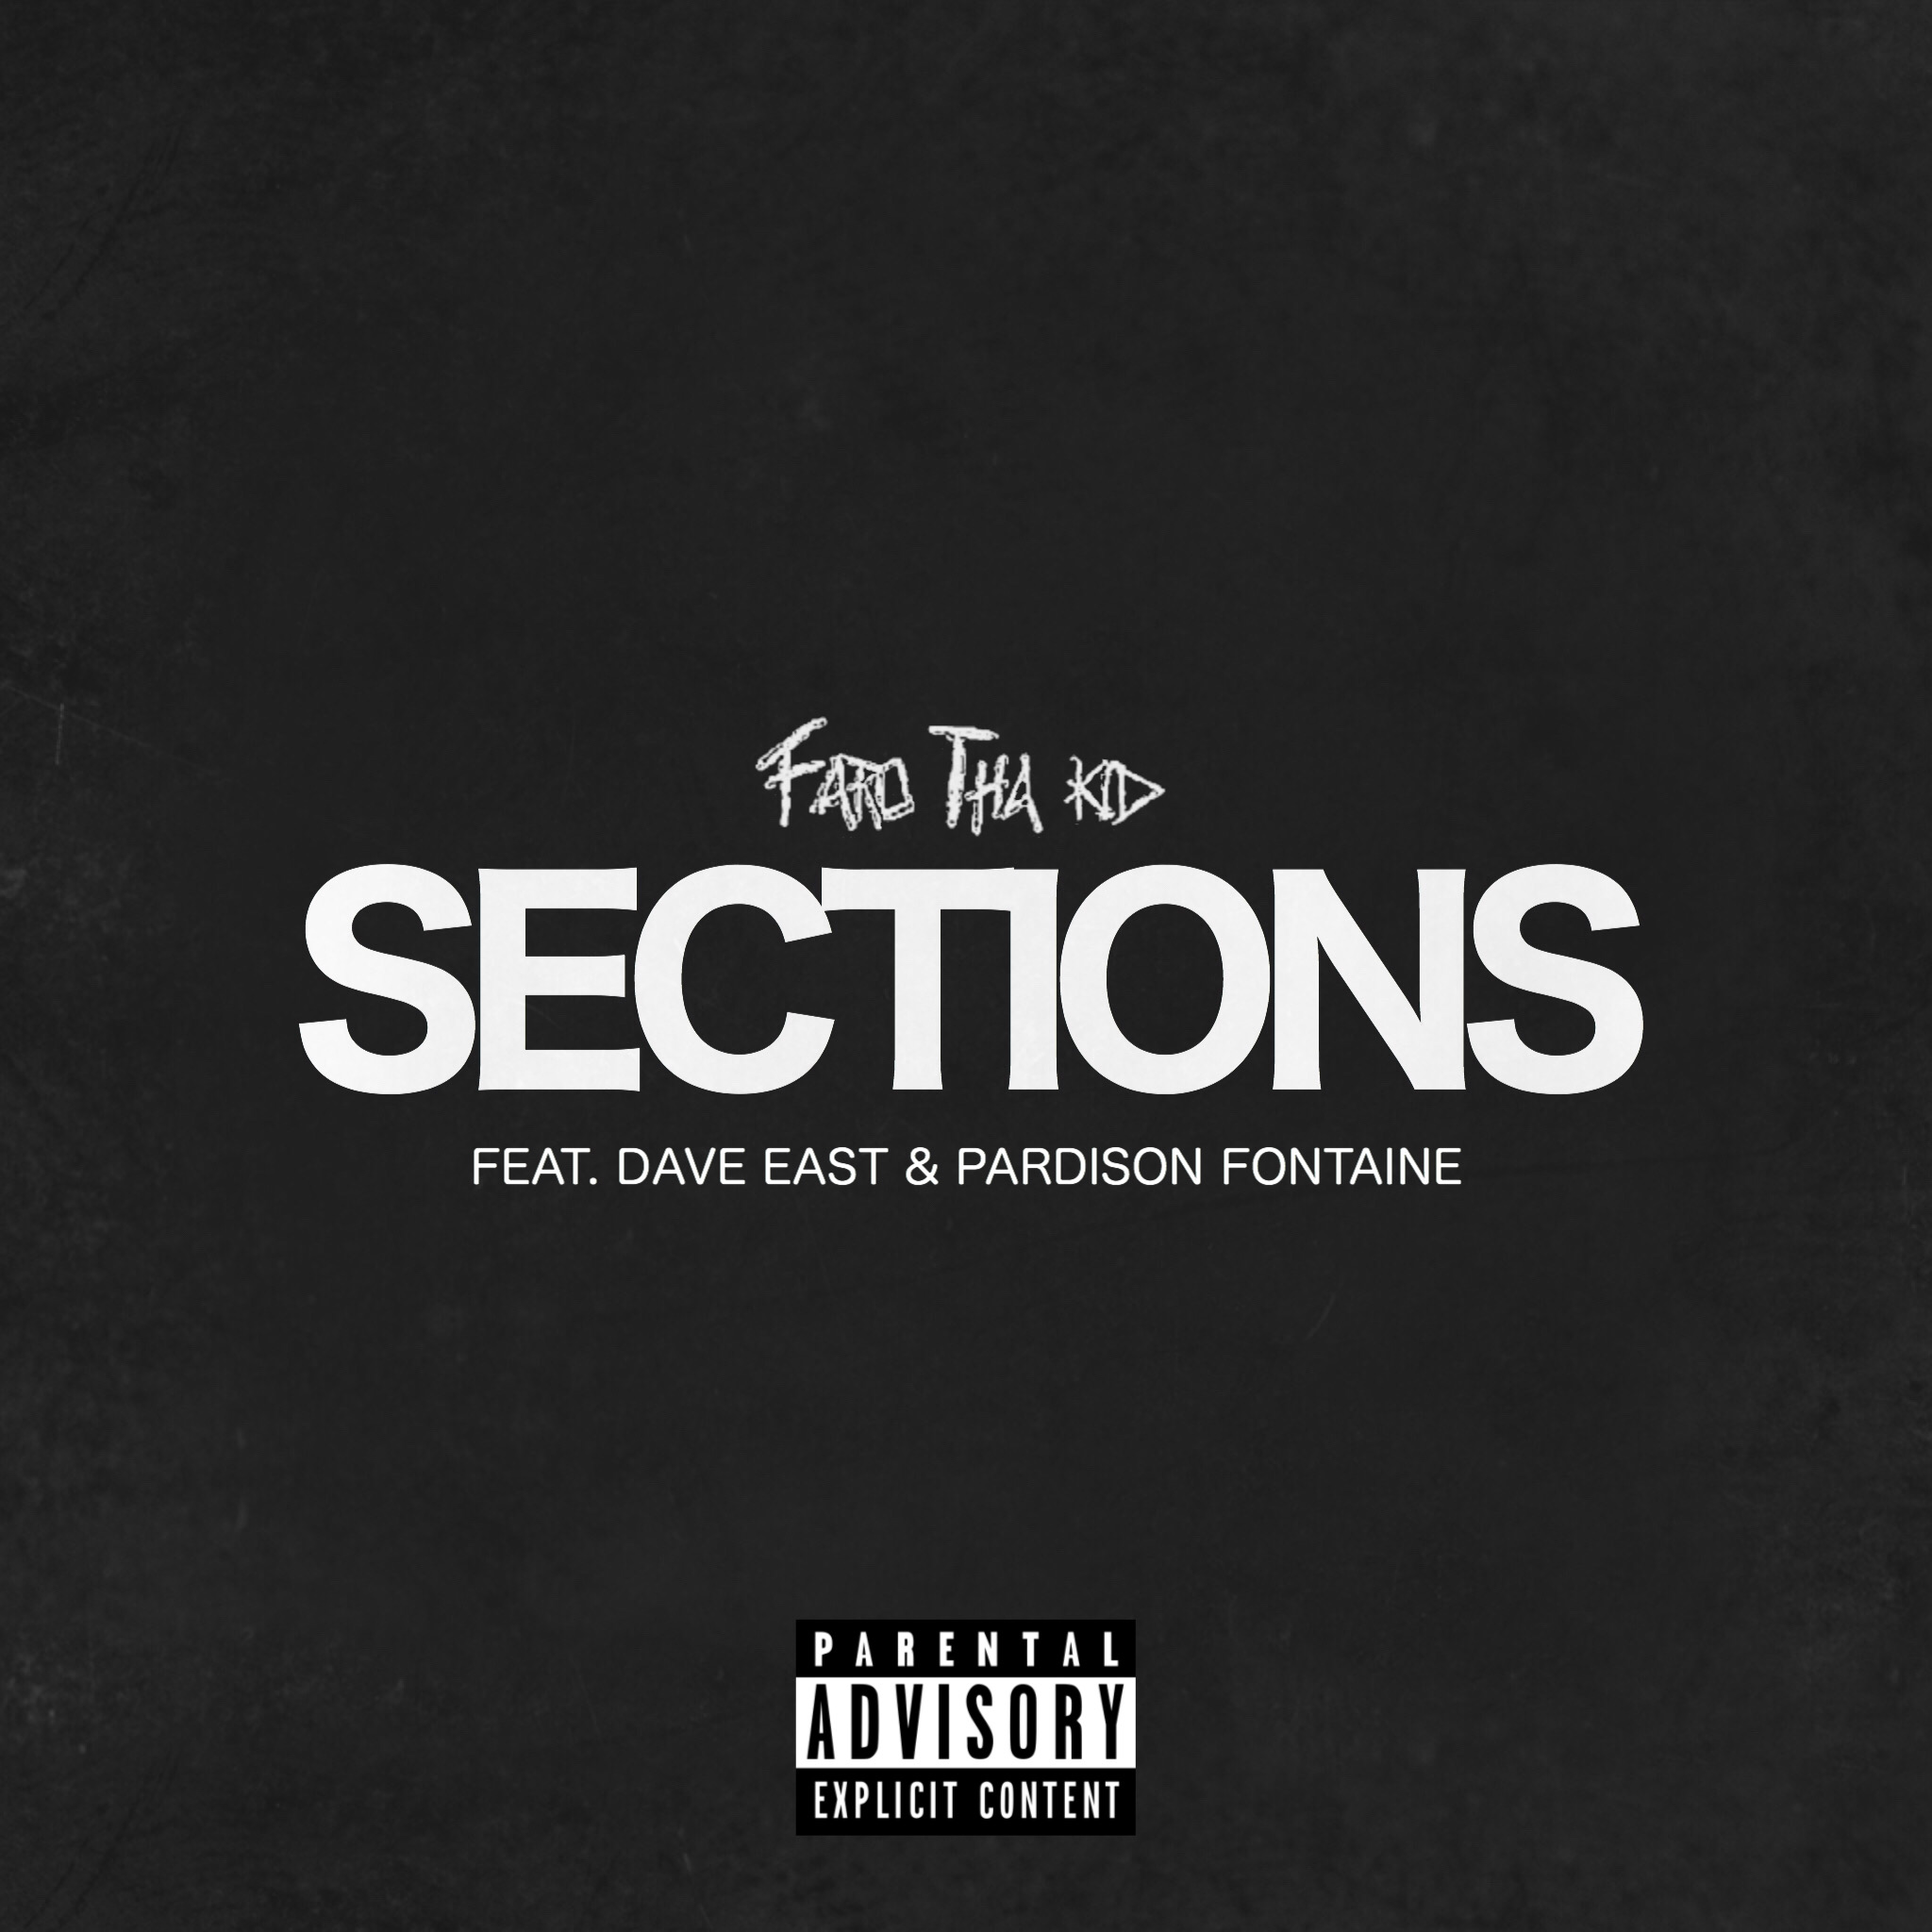 Faro Tha Kid - Sections (feat. Dave East & Pardison Fontaine)